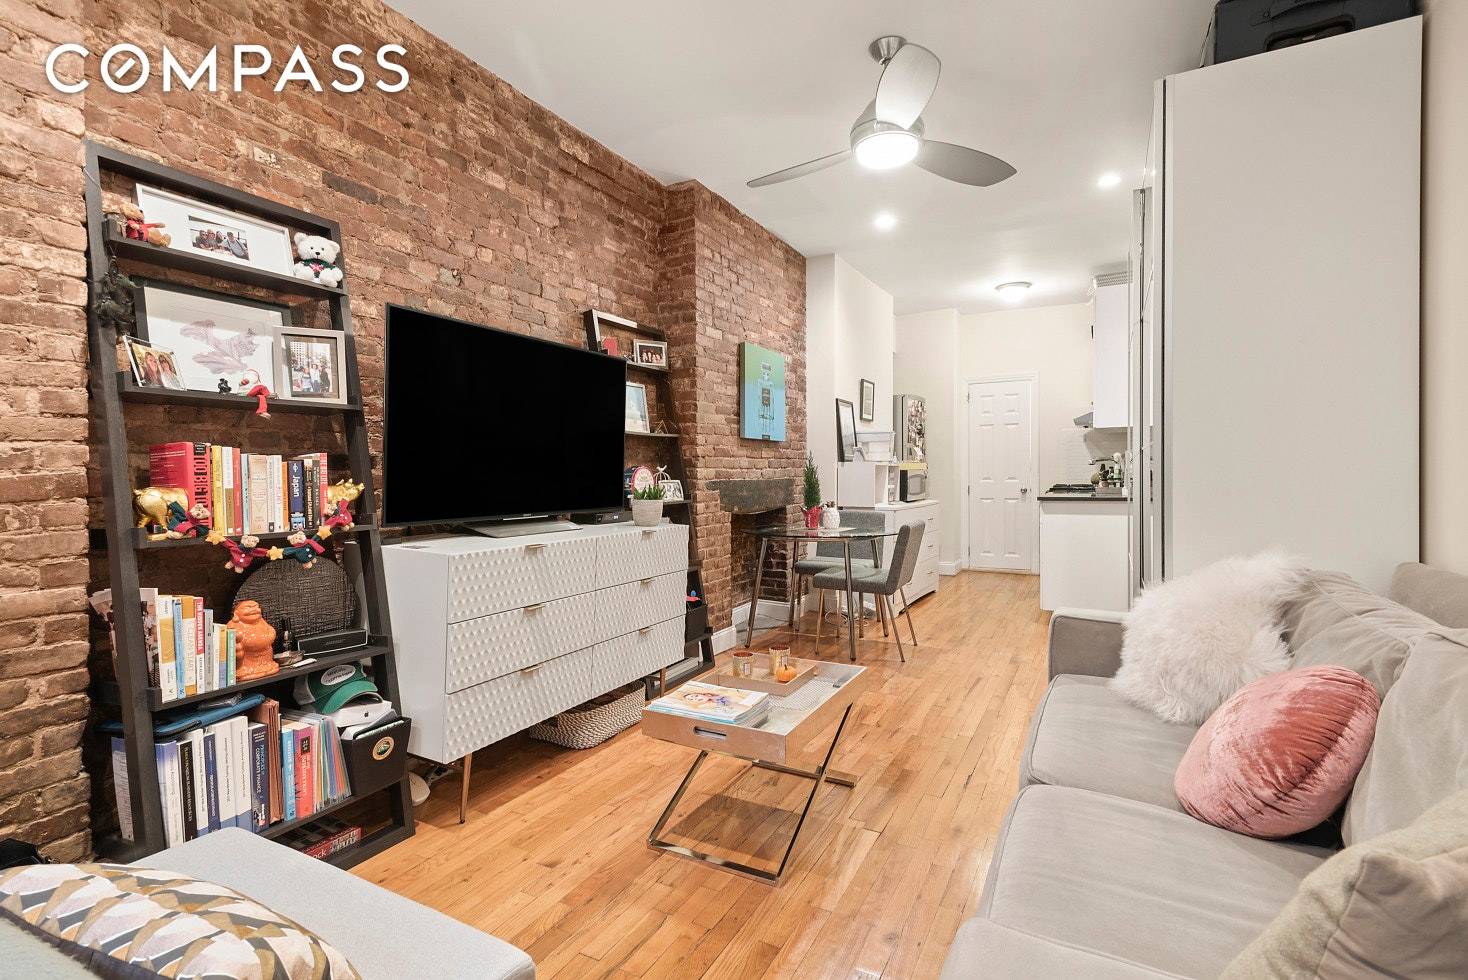 This spacious loft studio is located in the heart of SoHo and is the perfect blend of city living and natural oasis.